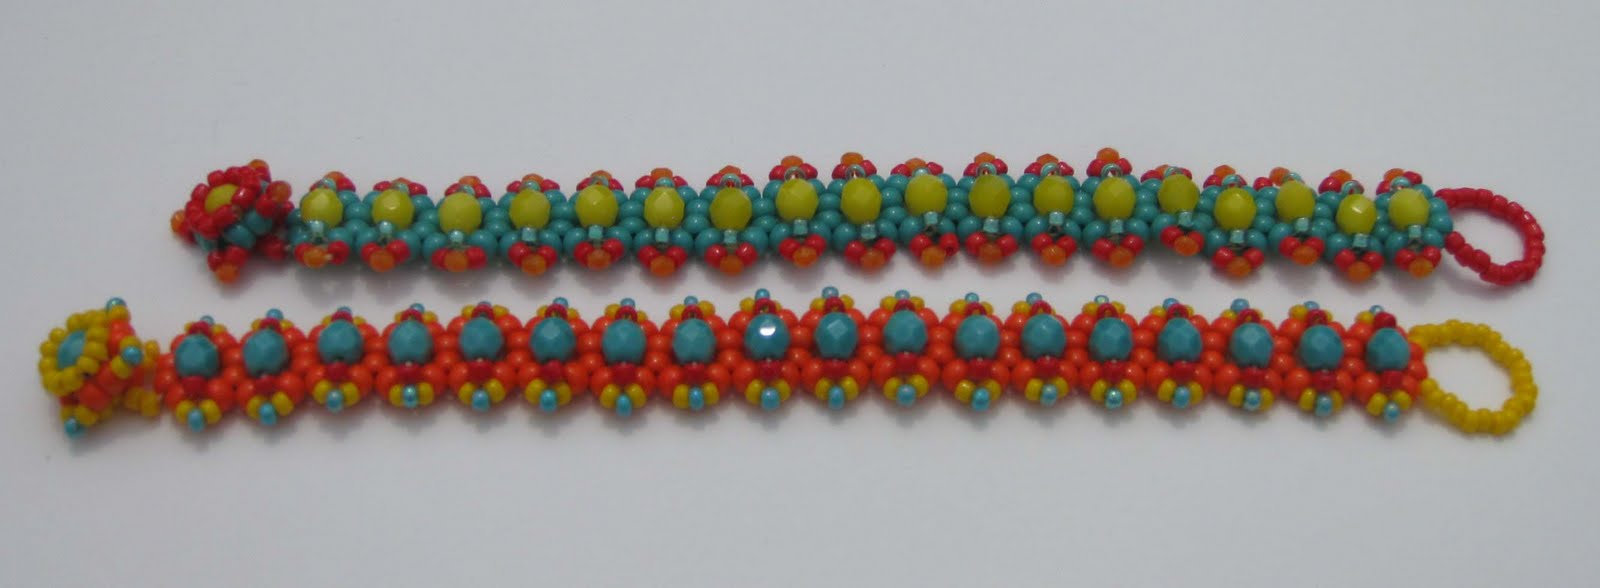 Bead Inspired: Some More Beading Projects